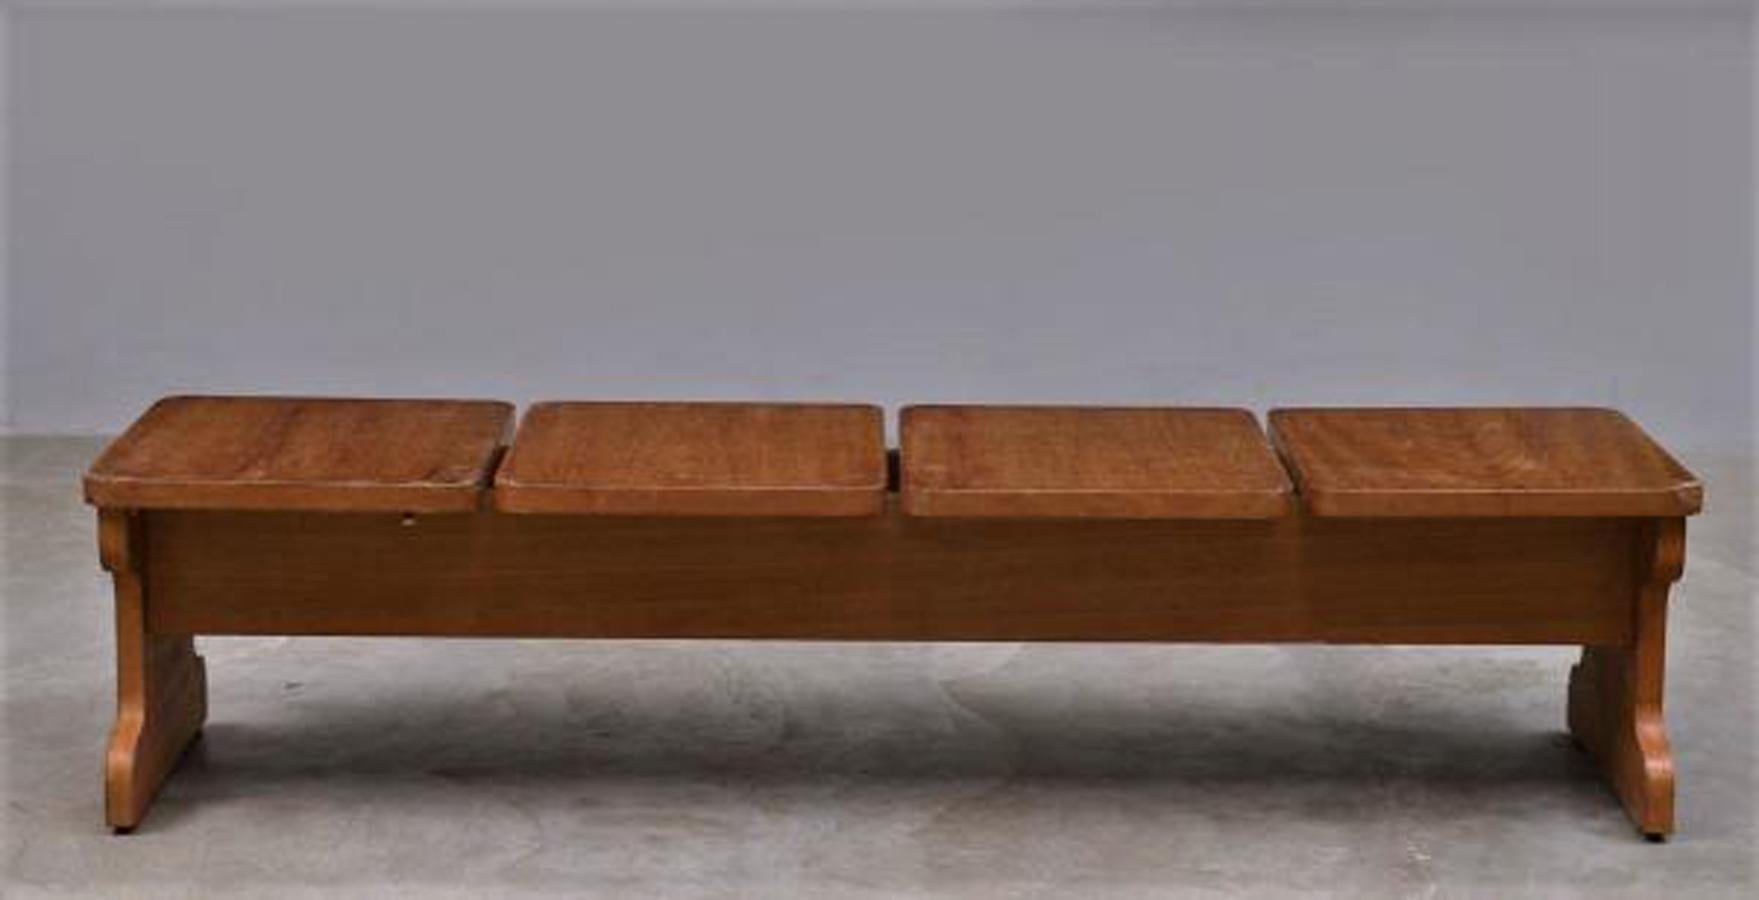 Long bench designed by Geraldo De Barros, considered one of the most important artists and designers In Brazilian Modernism. 